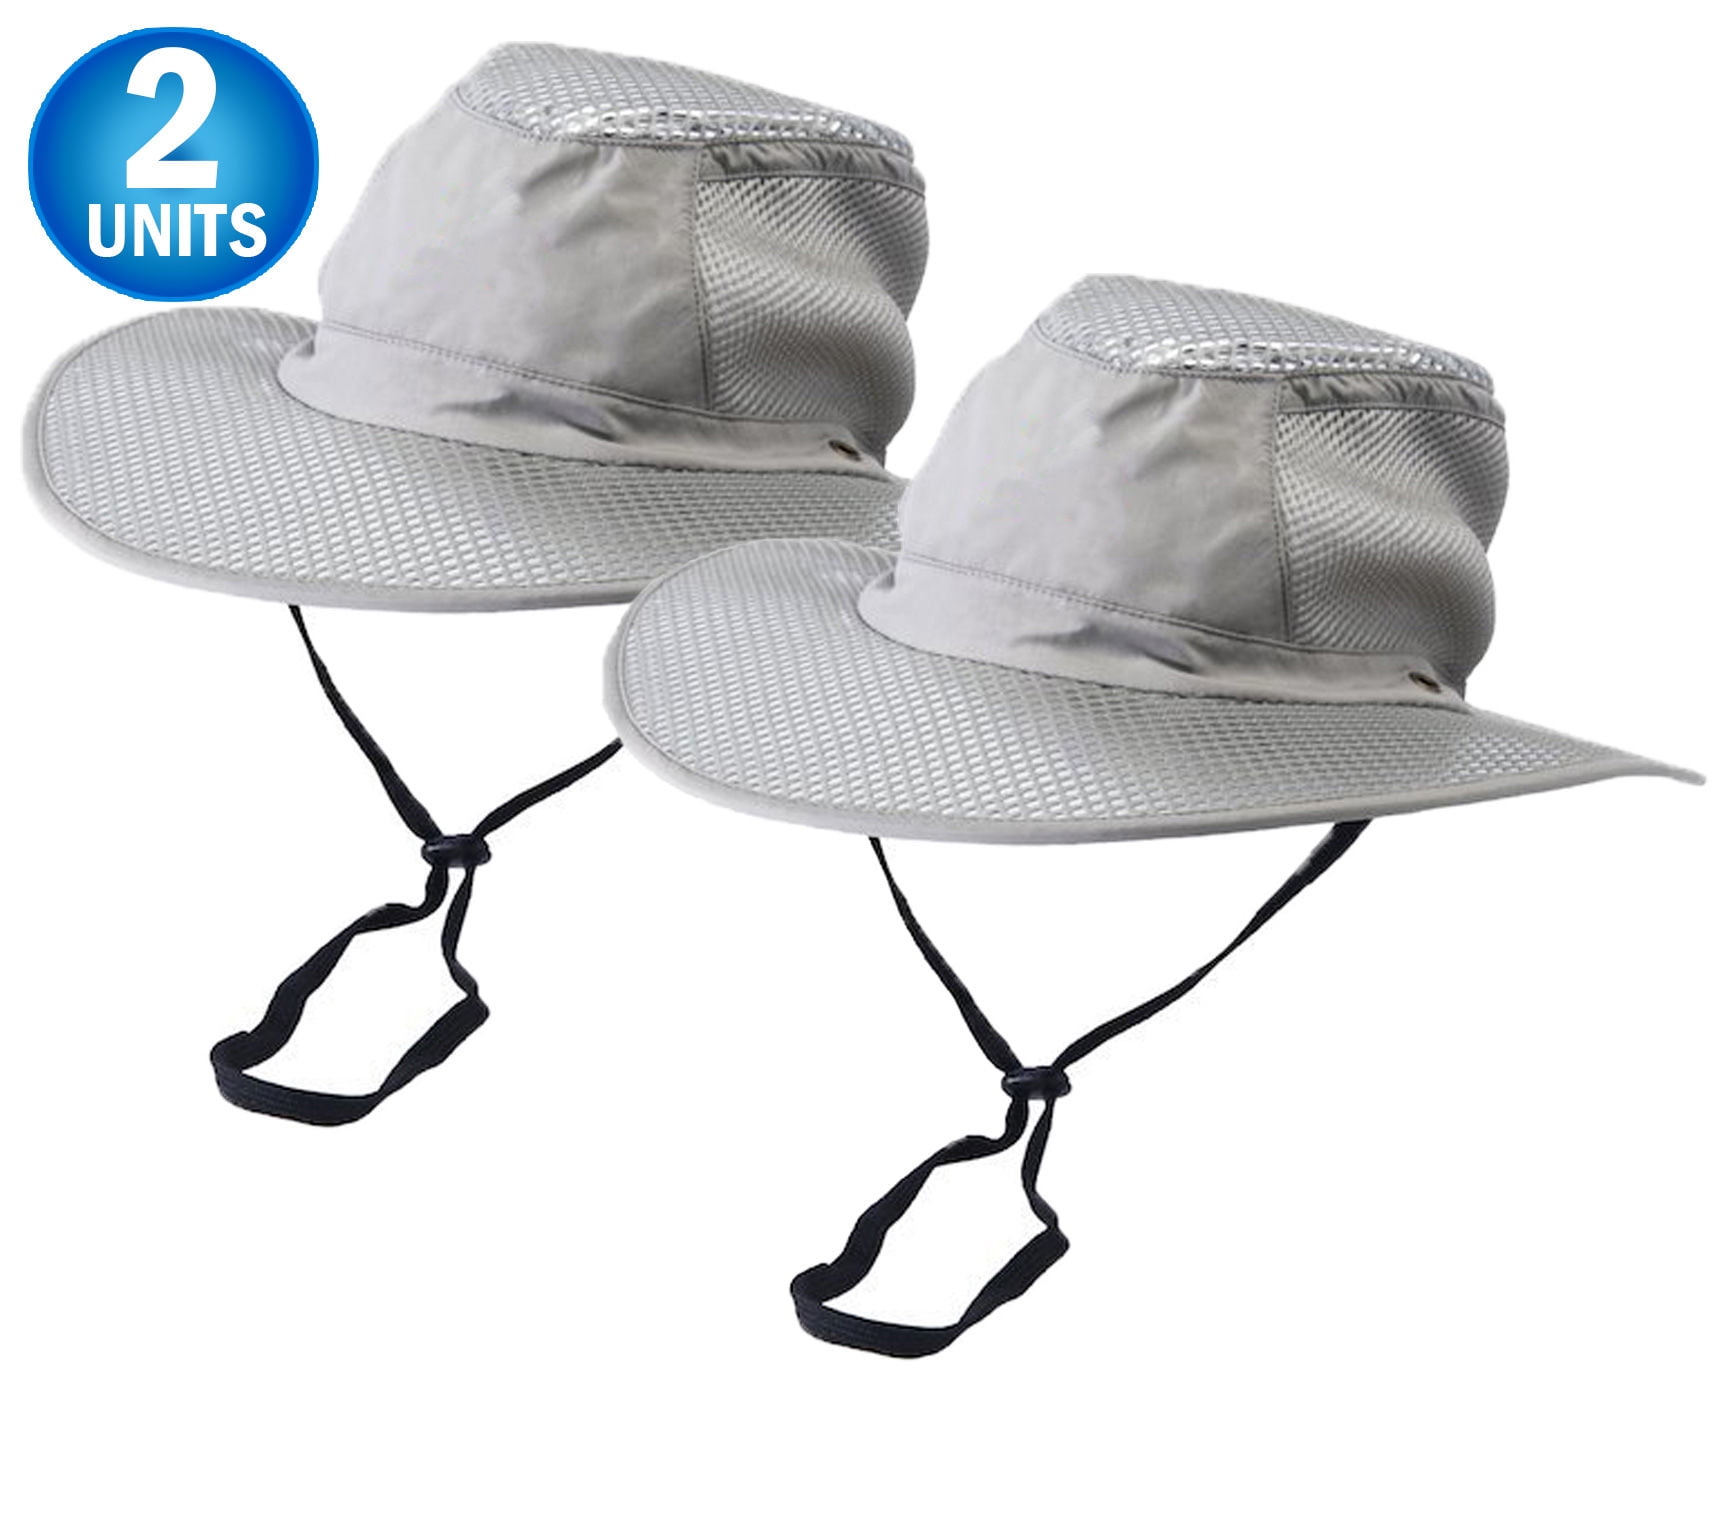 Evaporative Cooling Bucket Hat Hydro w/ UV Protection Cooler Arctic Cap US Stock 